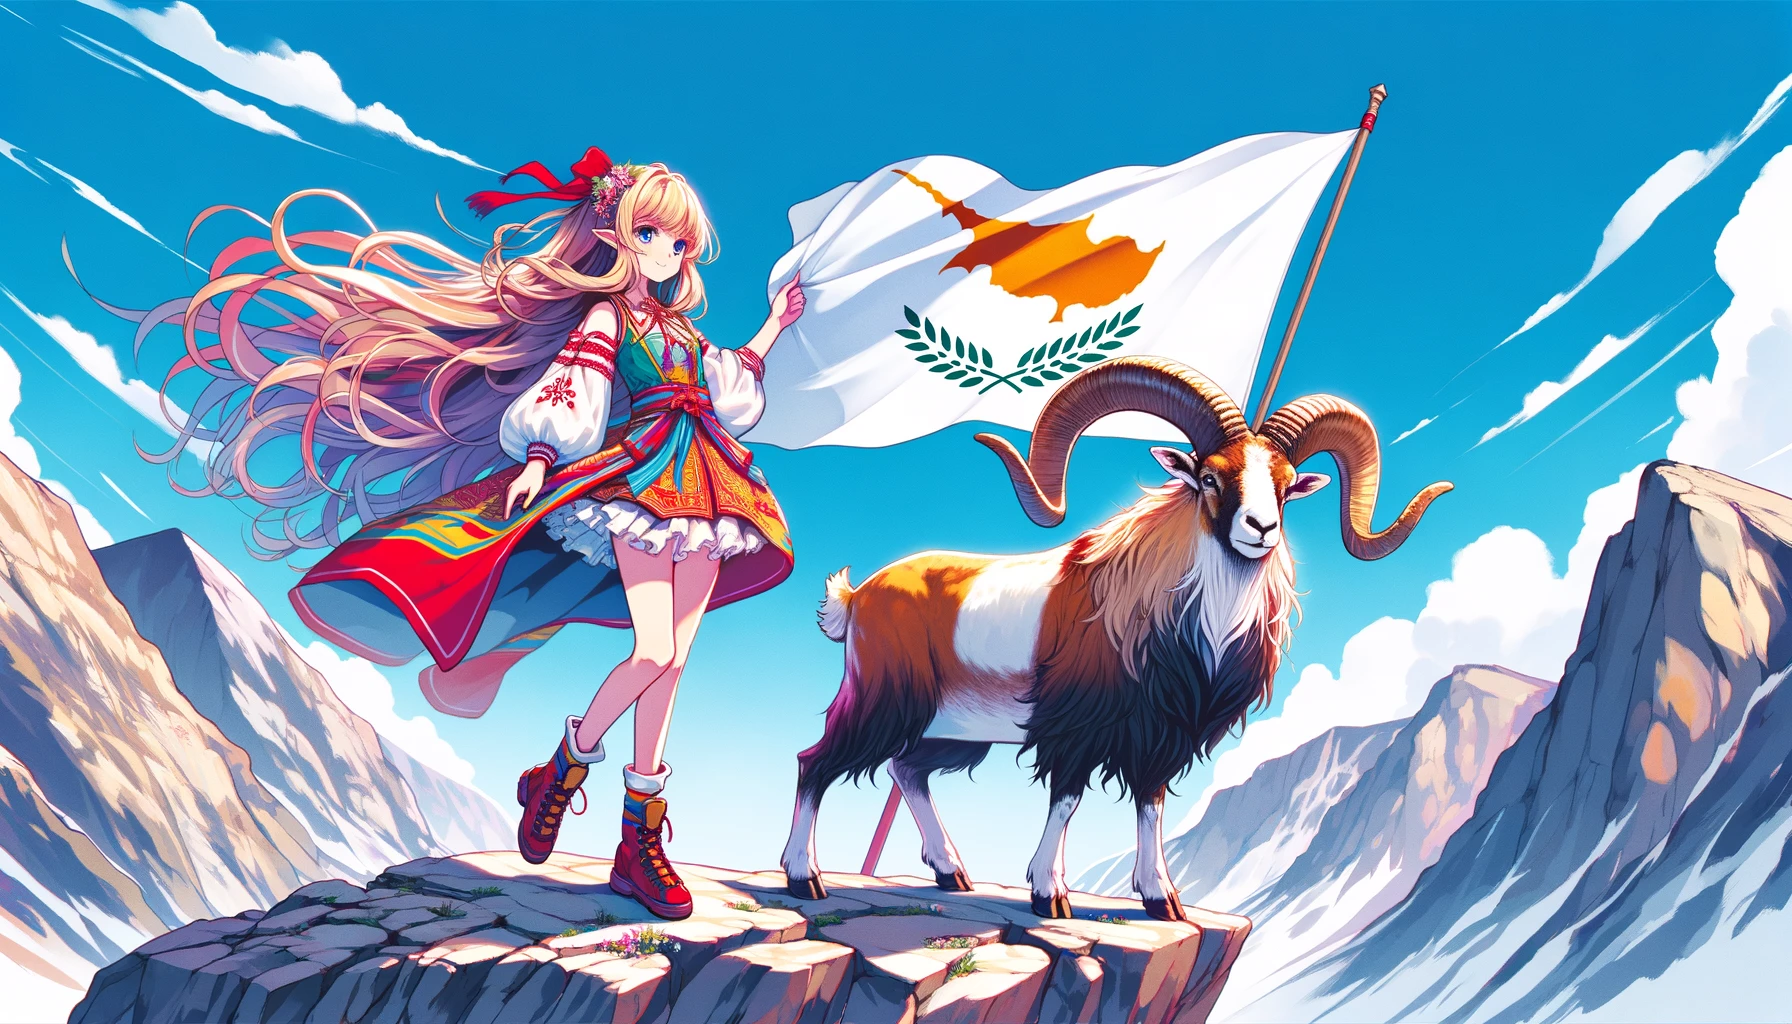 An anime-style illustration of a girl with long flowing hair, dressed in a vibrant costume featuring the colors of the Cyprus flag, standing triumphantly atop a rugged mountain peak. She is holding the flag of Cyprus with pride, the fabric fluttering in the mountain breeze. Beside her stands a large, majestic mouflon goat with curved horns, gazing into the distance. The background showcases a clear blue sky with a few scattered clouds.